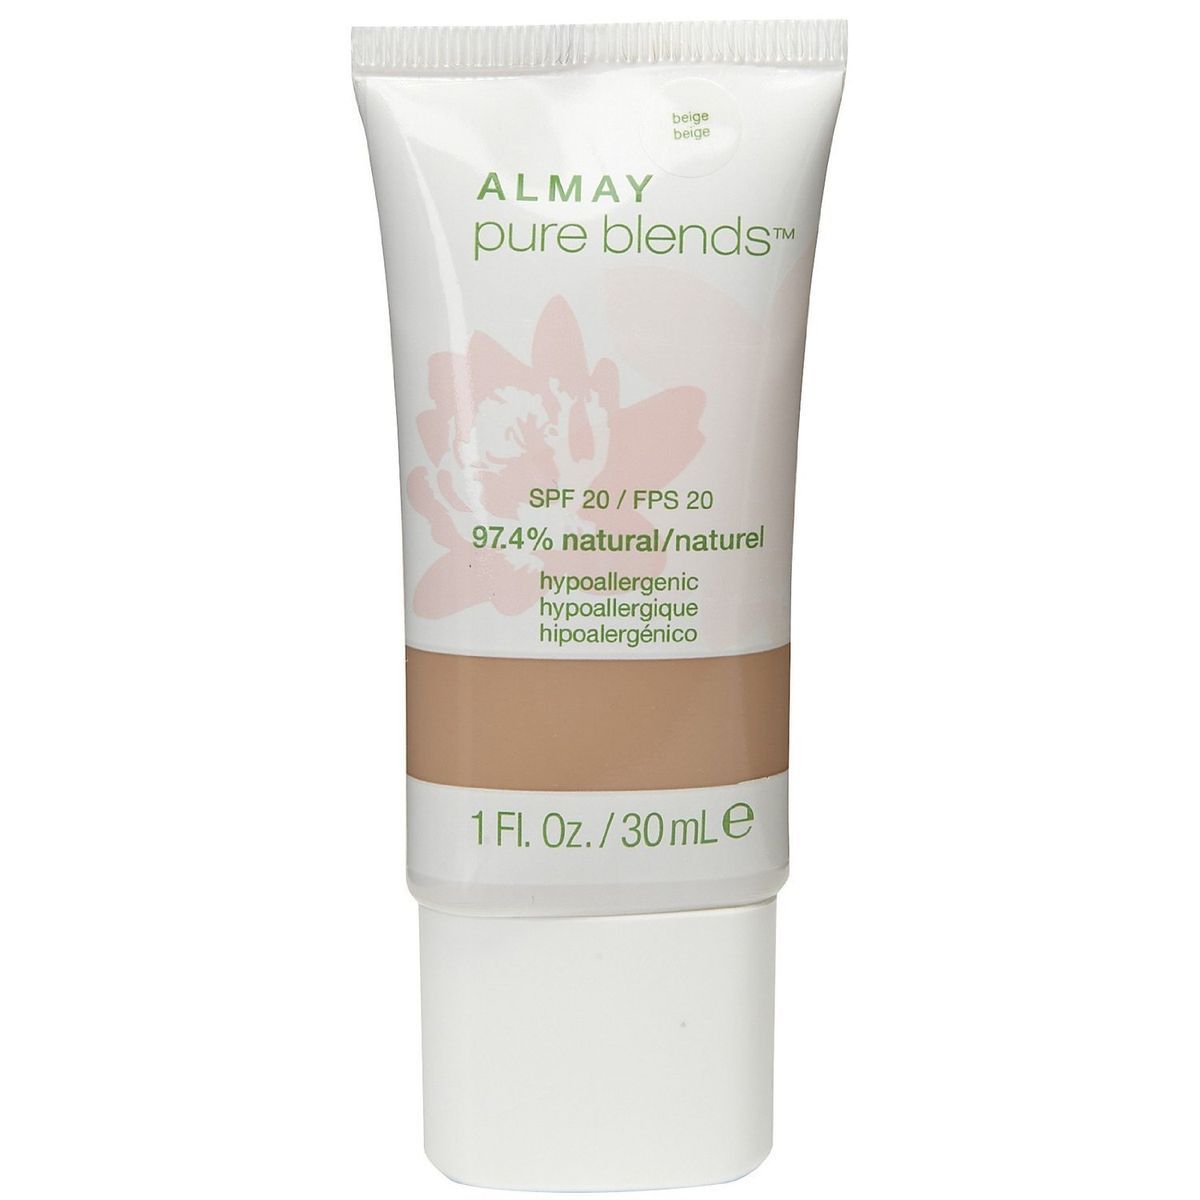 Almay Pure Blends Makeup Beige 1 Fluid Ounce Brand New Sealed